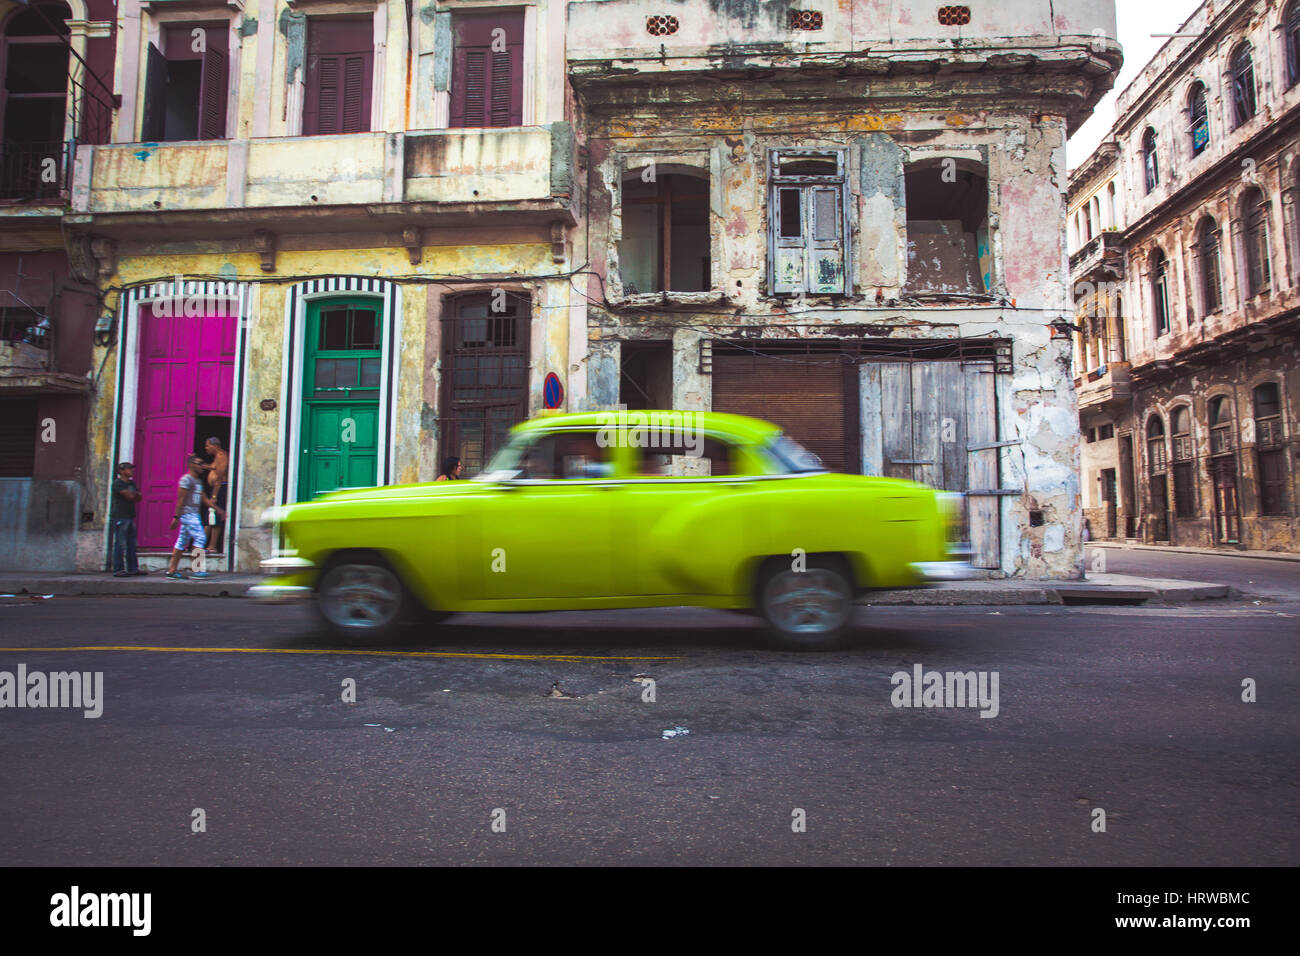 Vintage classic american car in a old street of old Avana, Cuba. Stock Photo